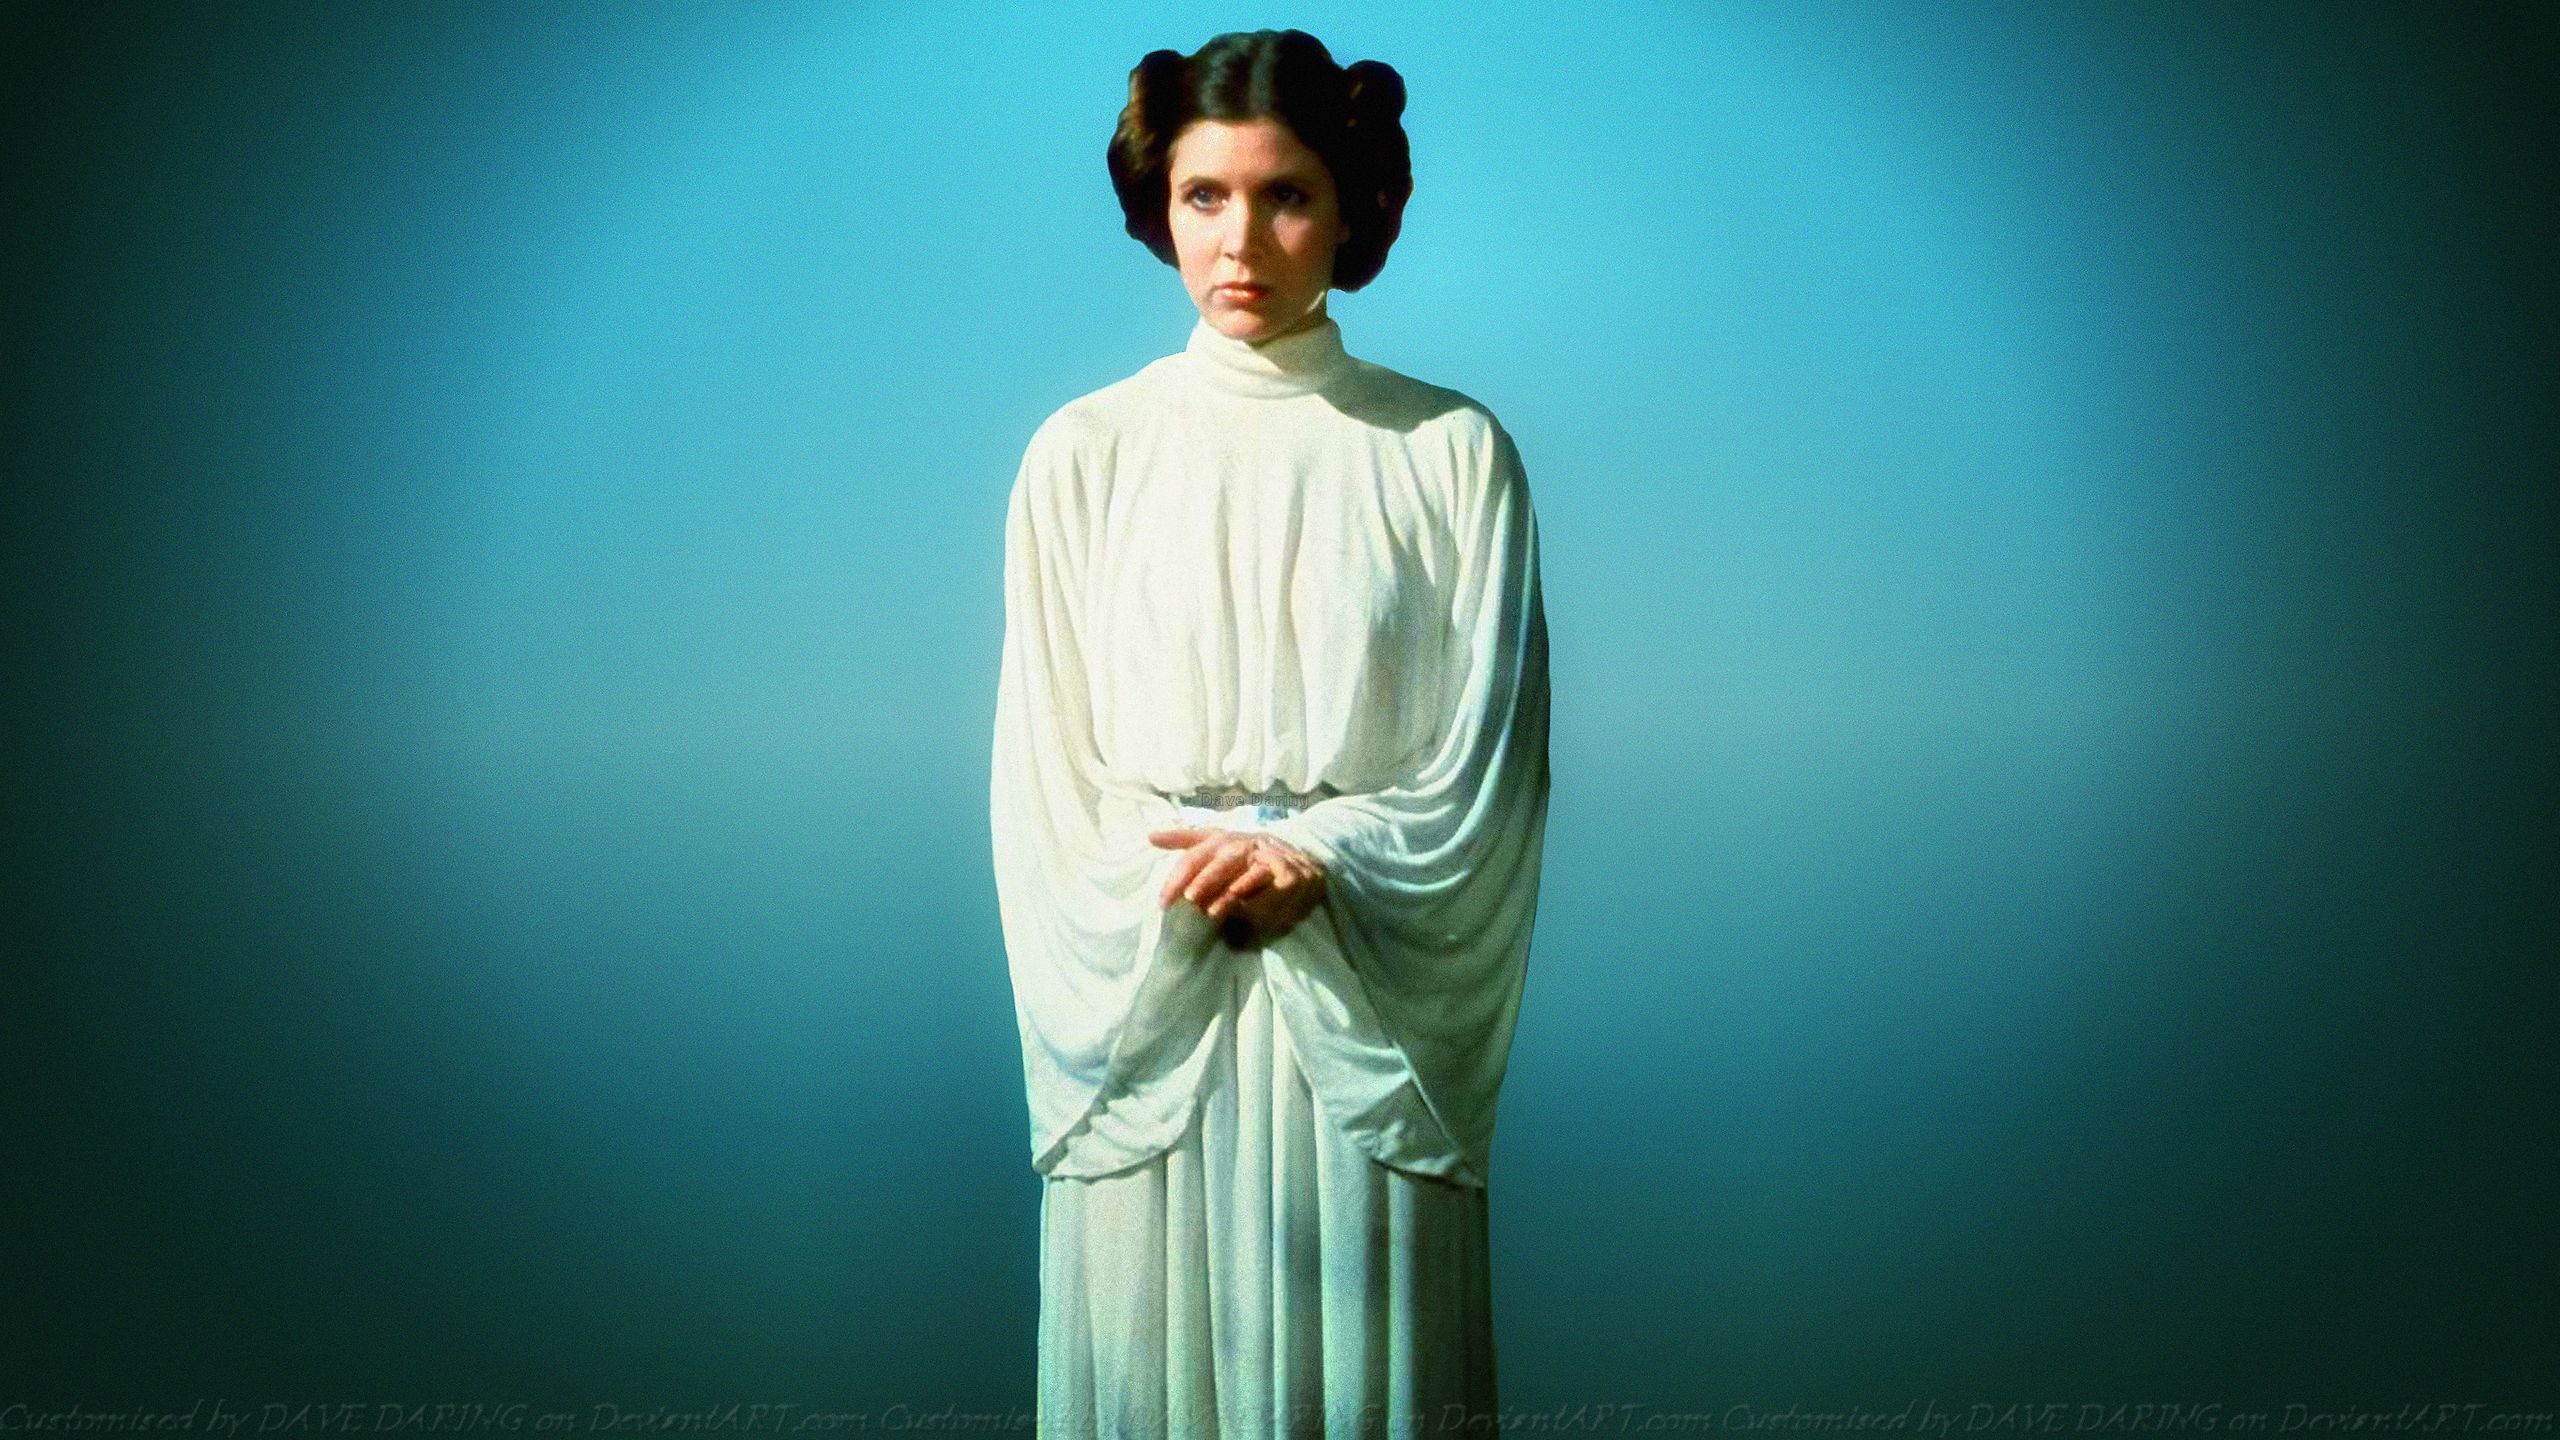 Carrie Fisher Princess Leia XXXII by Dave Daring on DeviantArt